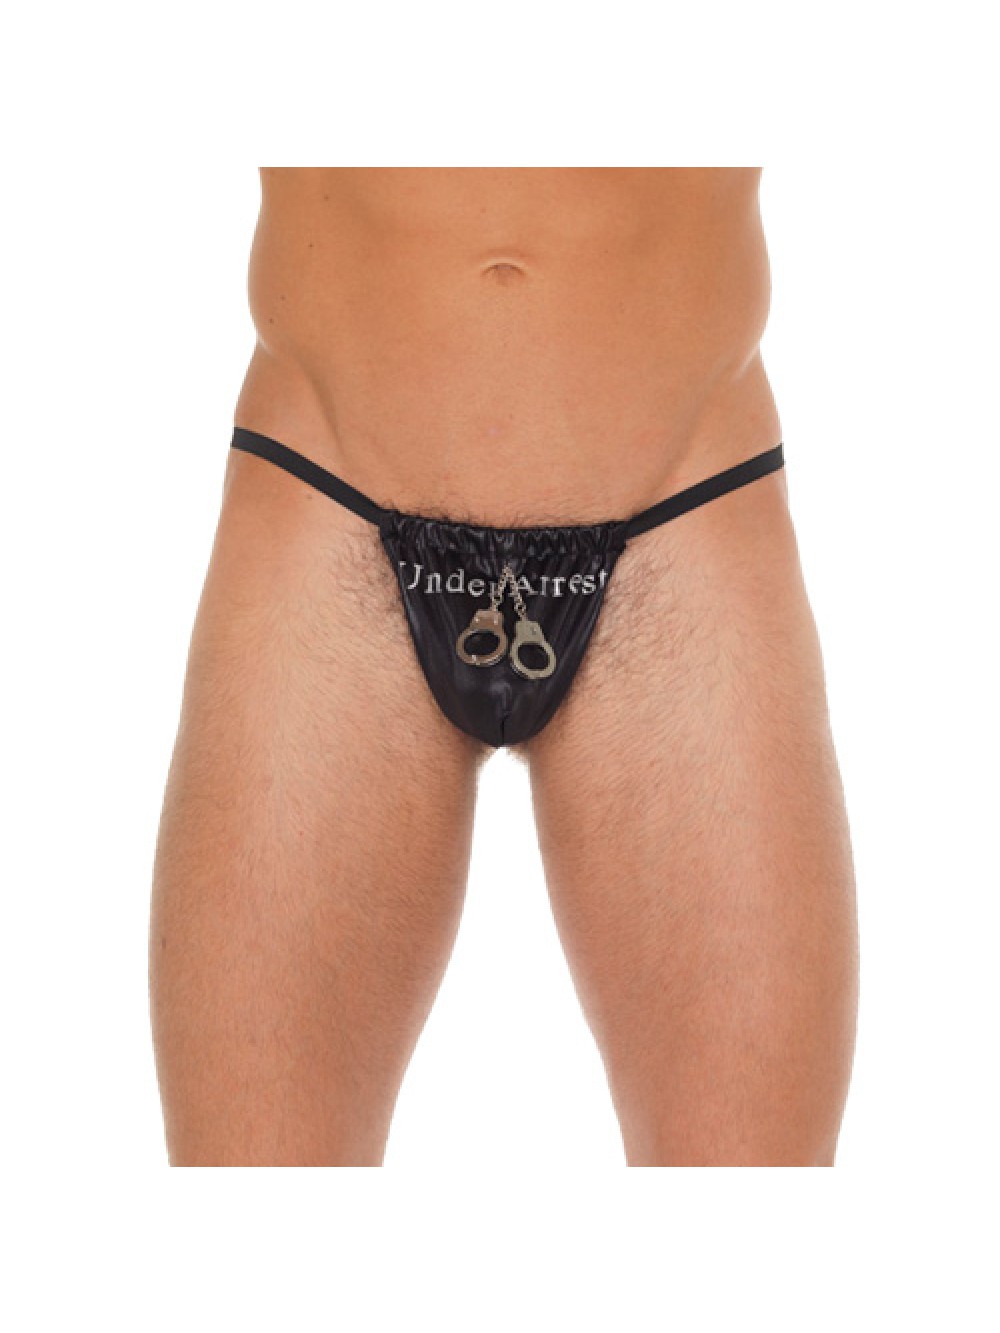 Mens Black G-String With Handcuff Pouch